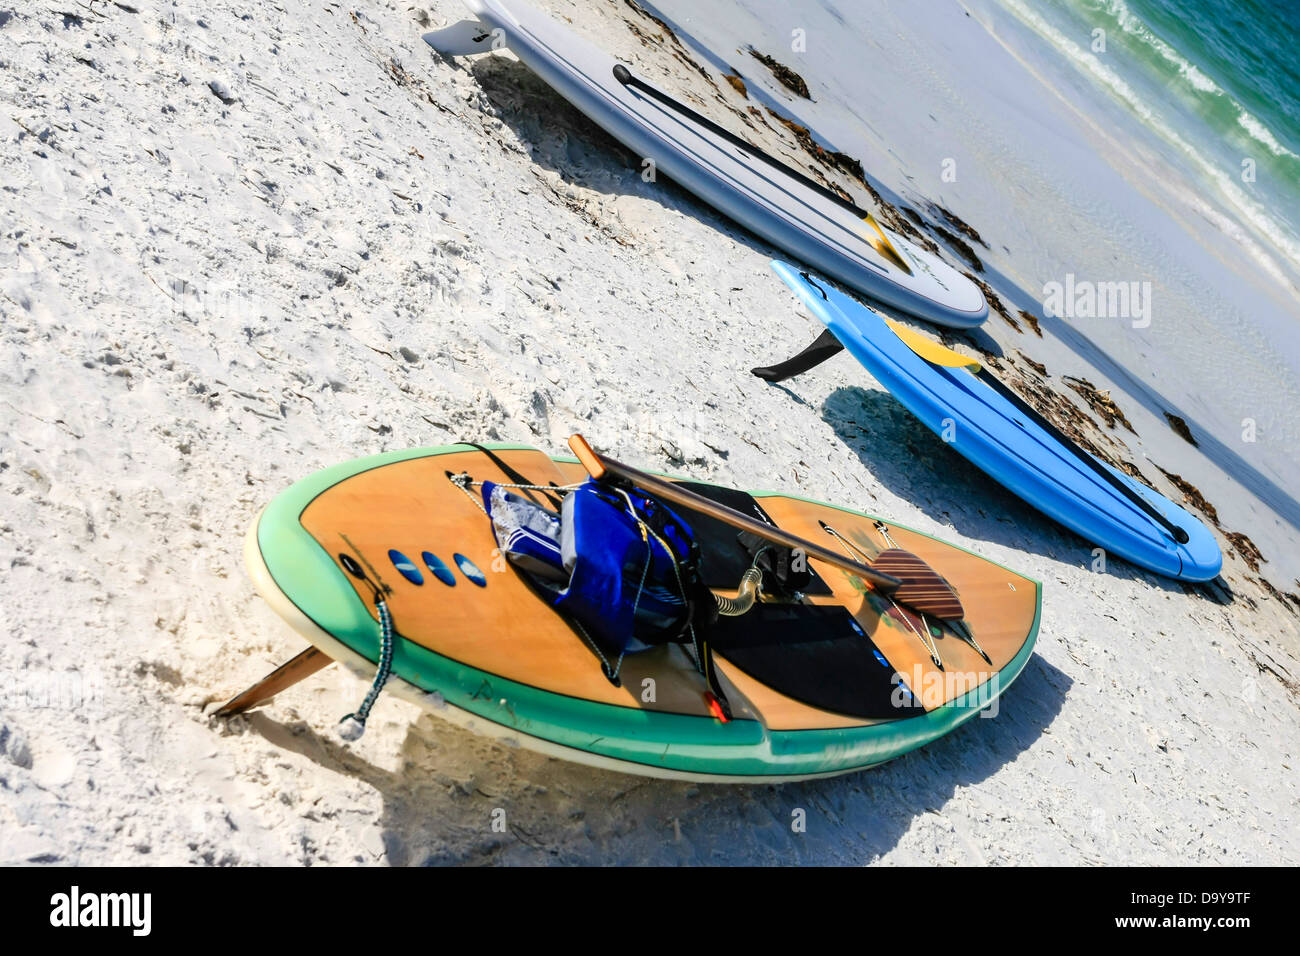 Paddle-boards lie on Siesta Key beach in Florida Stock Photo